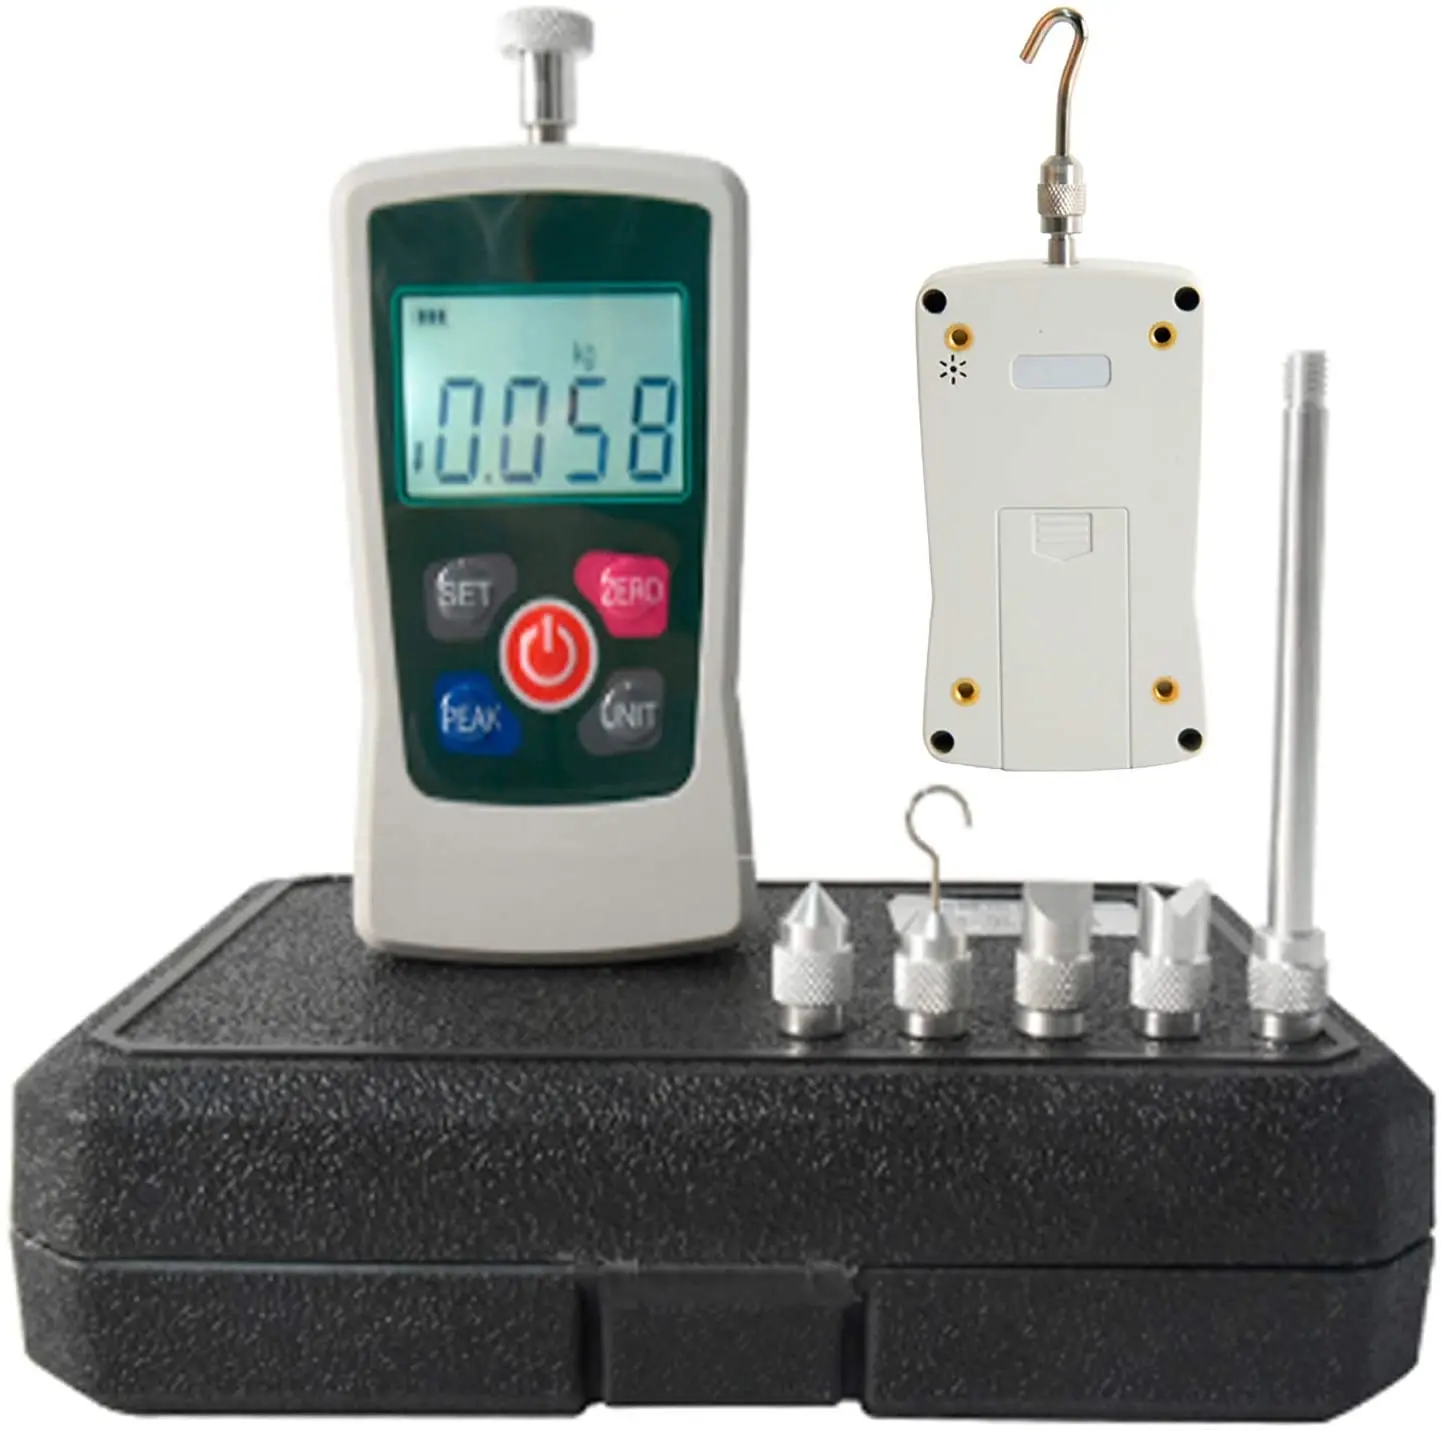 

Digital Push Pull Force Gauge Meter Tester with Max 500N N Kg Lb Oz Four Units Automatic Backlight Buzzer Alarm Function